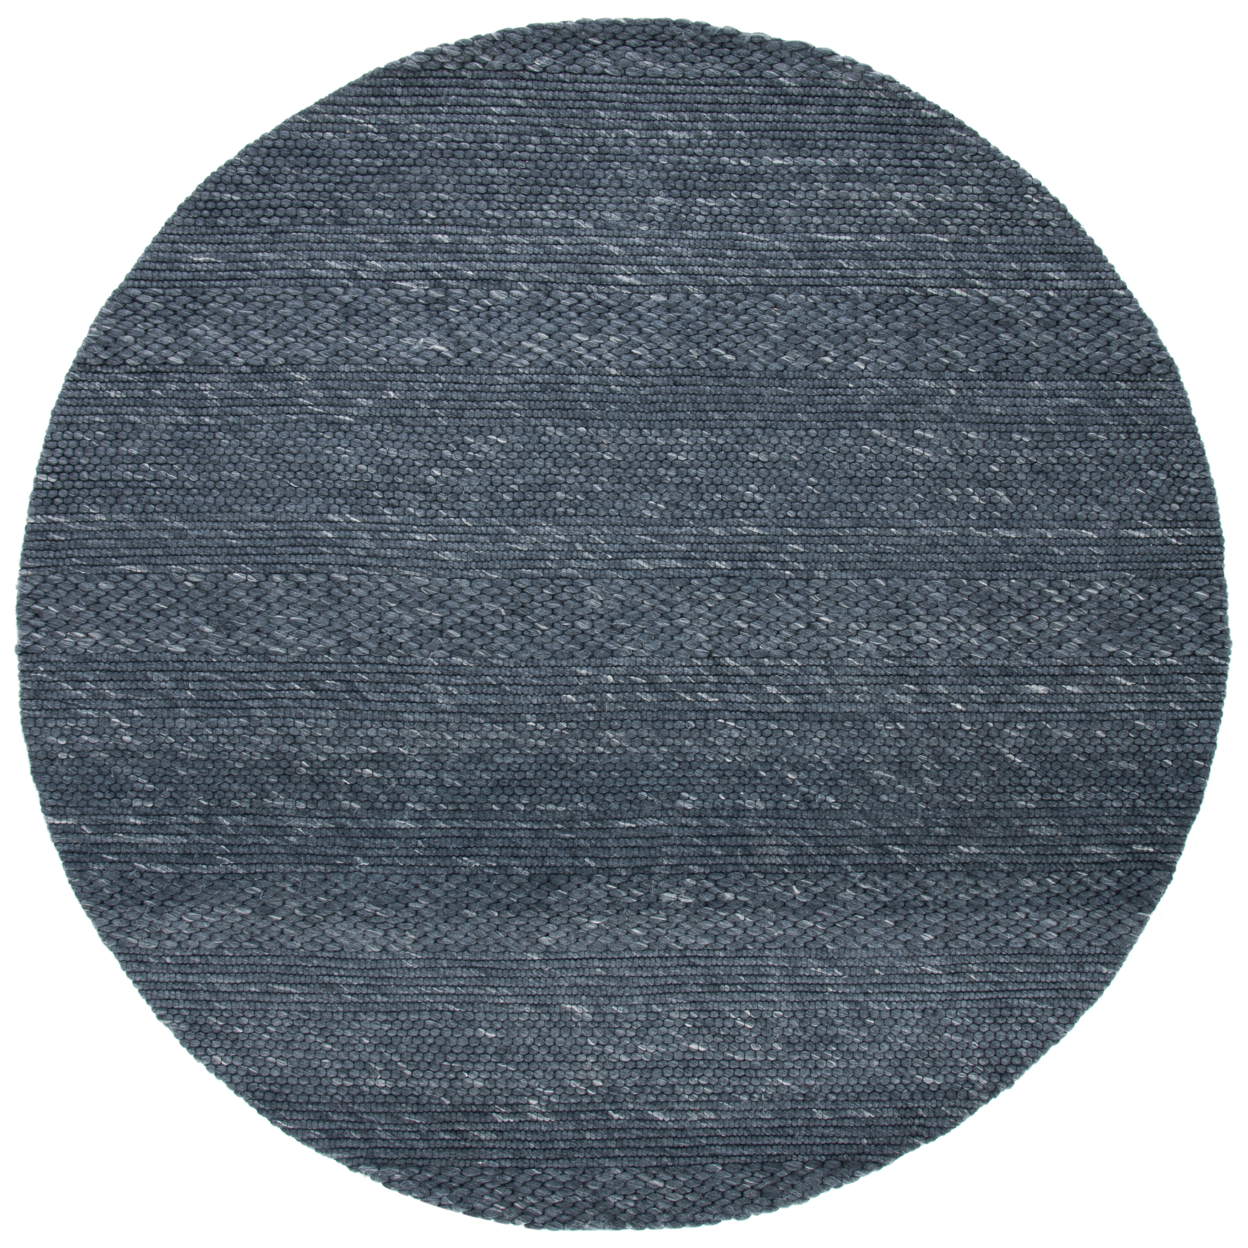 SAFAVIEH Marbella Collection MRB556H Charcoal Rug - 7' Round